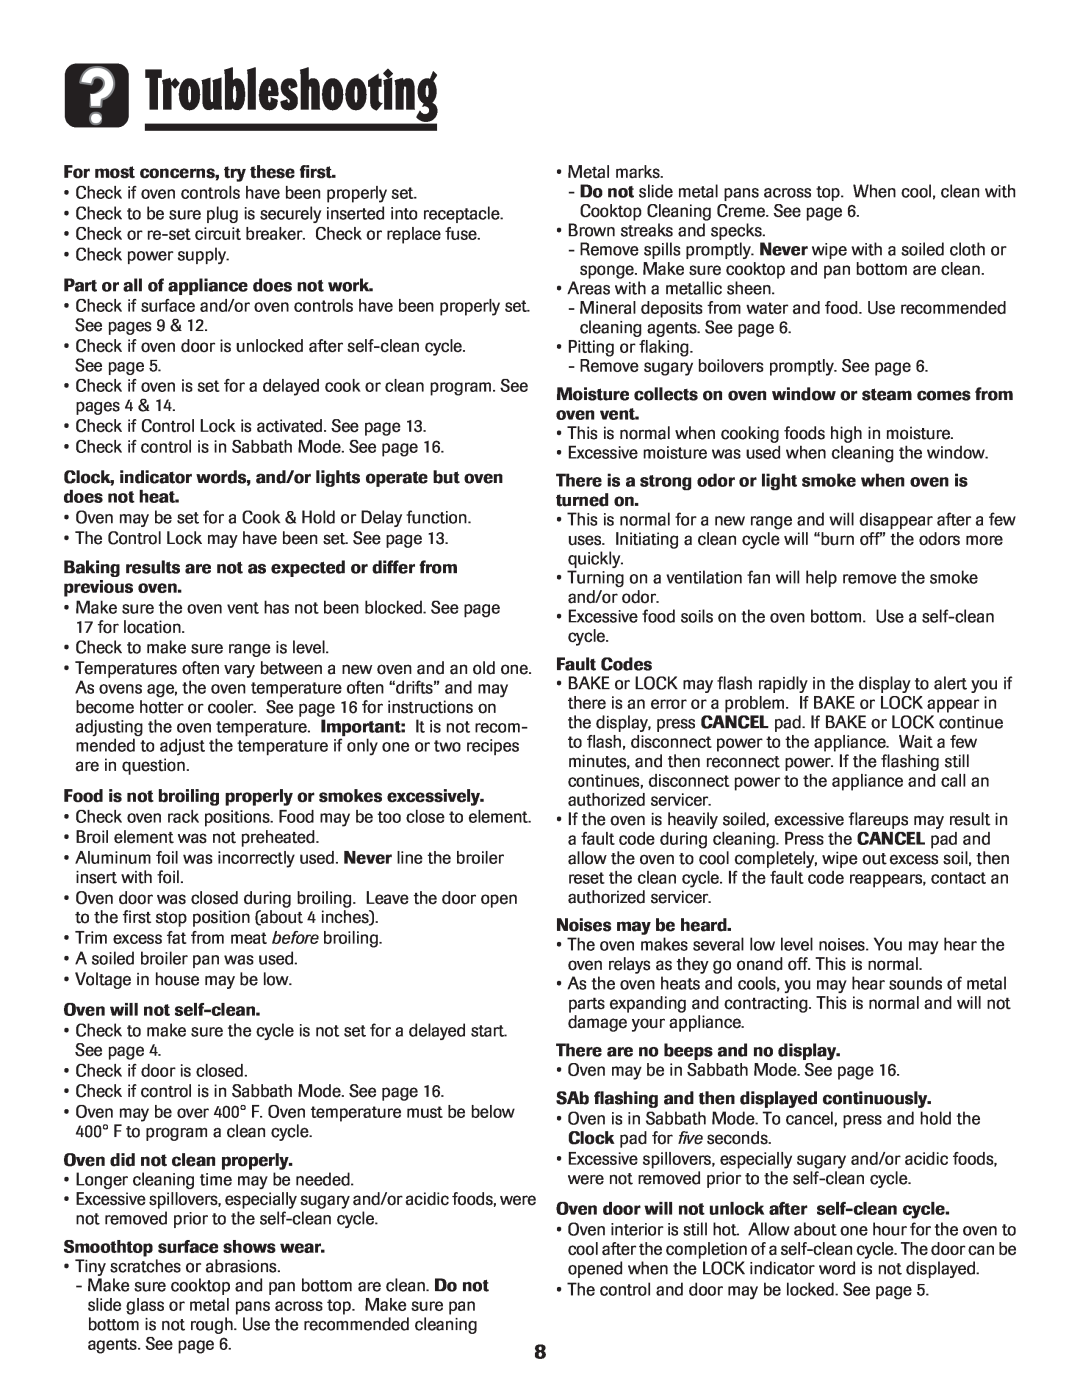 Maytag MER5775RAW important safety instructions Troubleshooting 